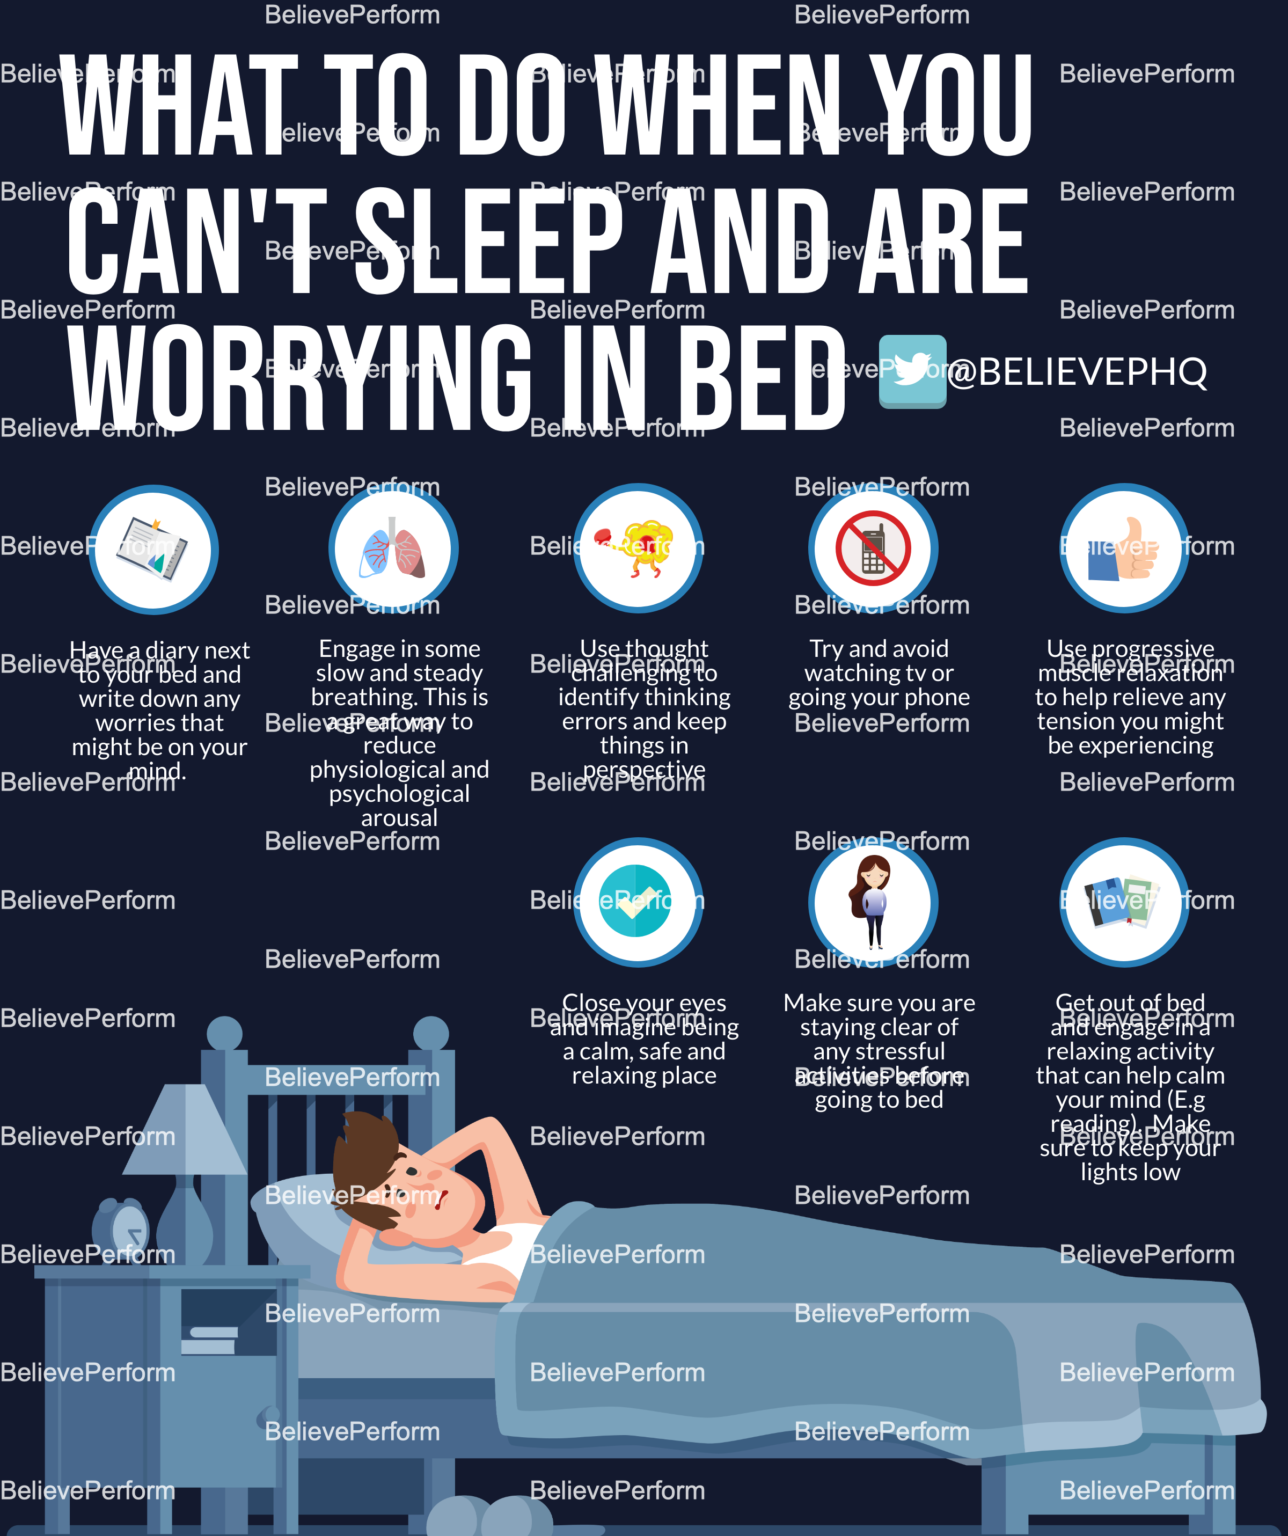 What To Do When You Cant Sleep Are Worrying In Bed 1288x1536 